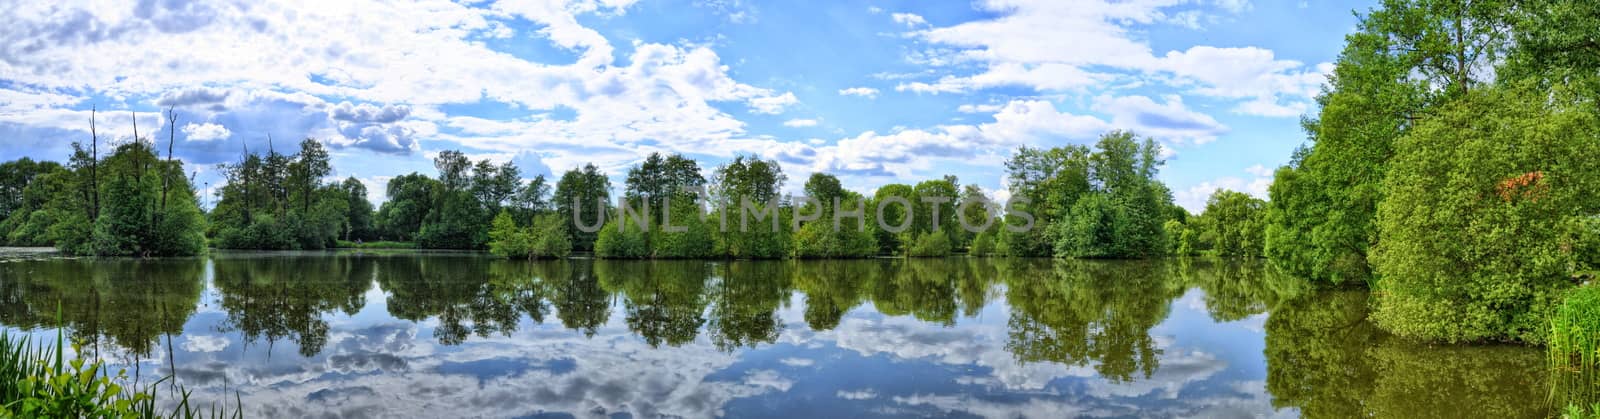 Fulda river in Aueweiher Park in Fulda, Hessen, Germany panora by Eagle2308